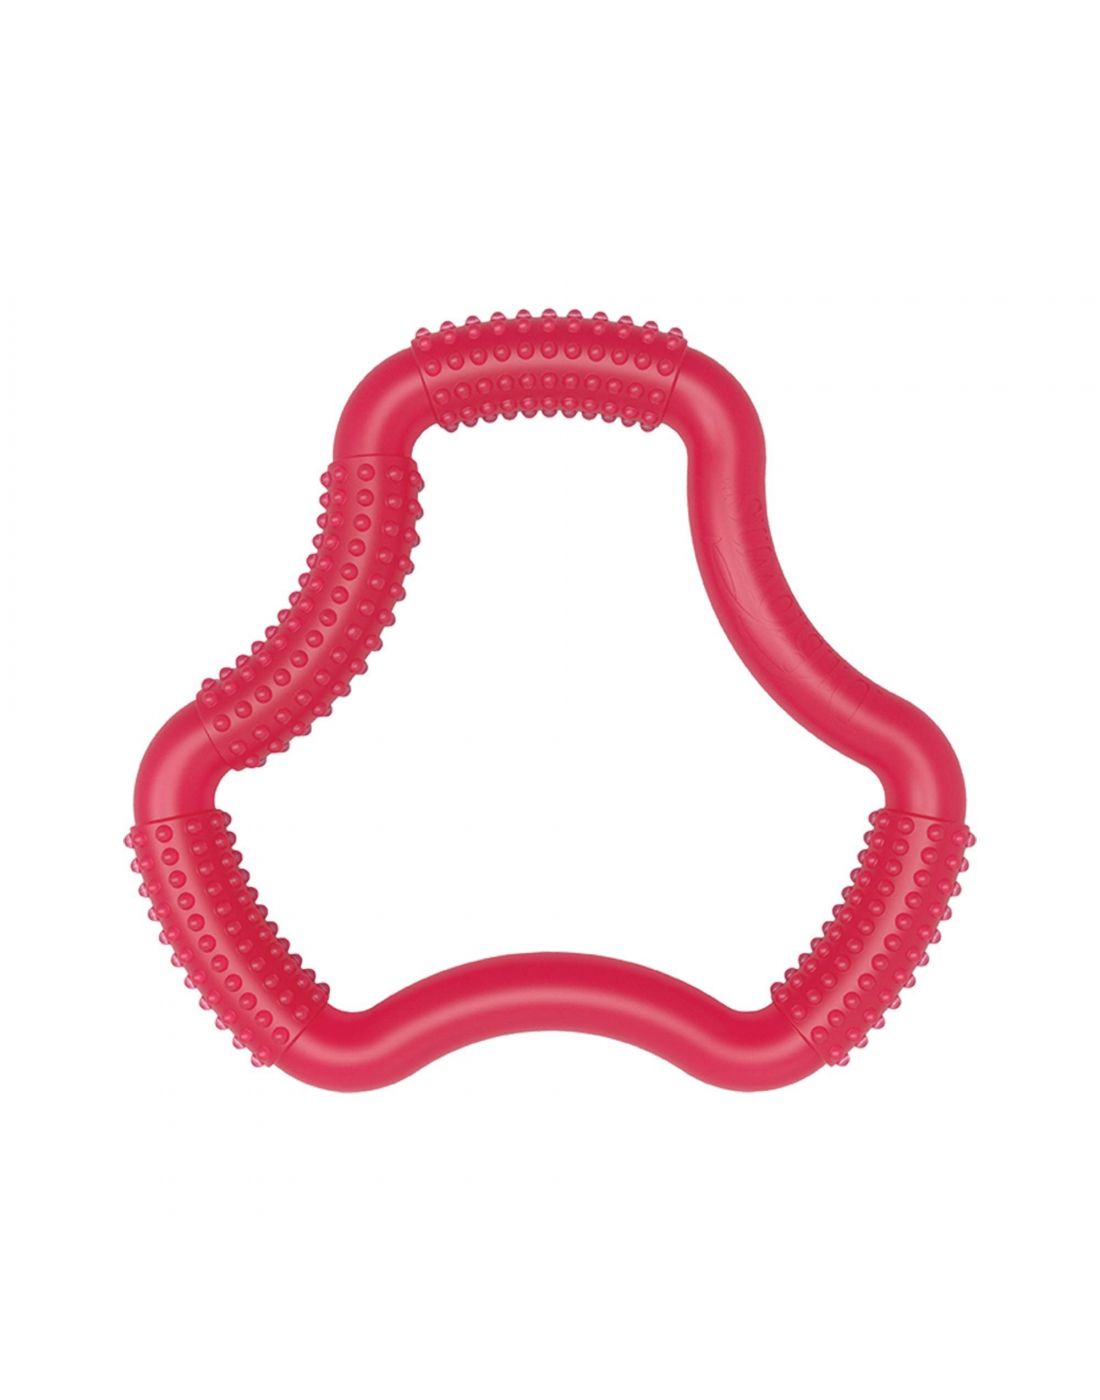 Dr.Brown's A-Shaped Teether 